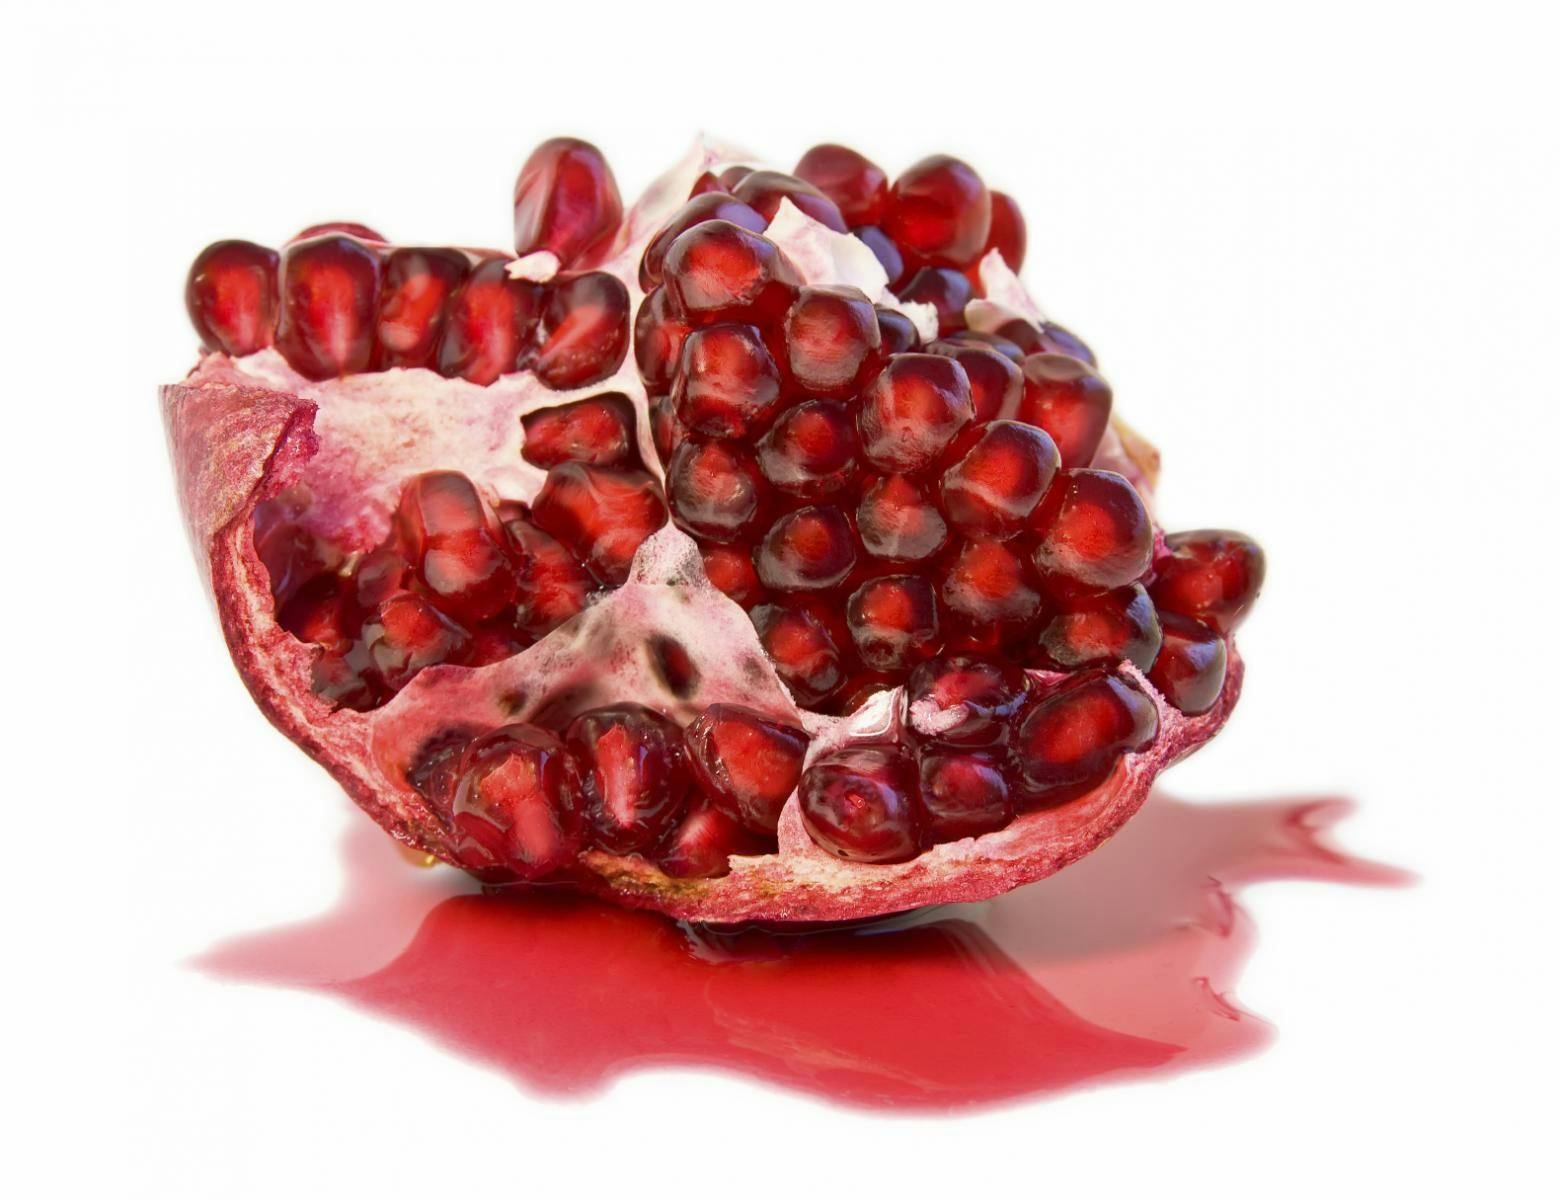 Is Pomegranate Uniquely Suited for Type 2 Diabetes?